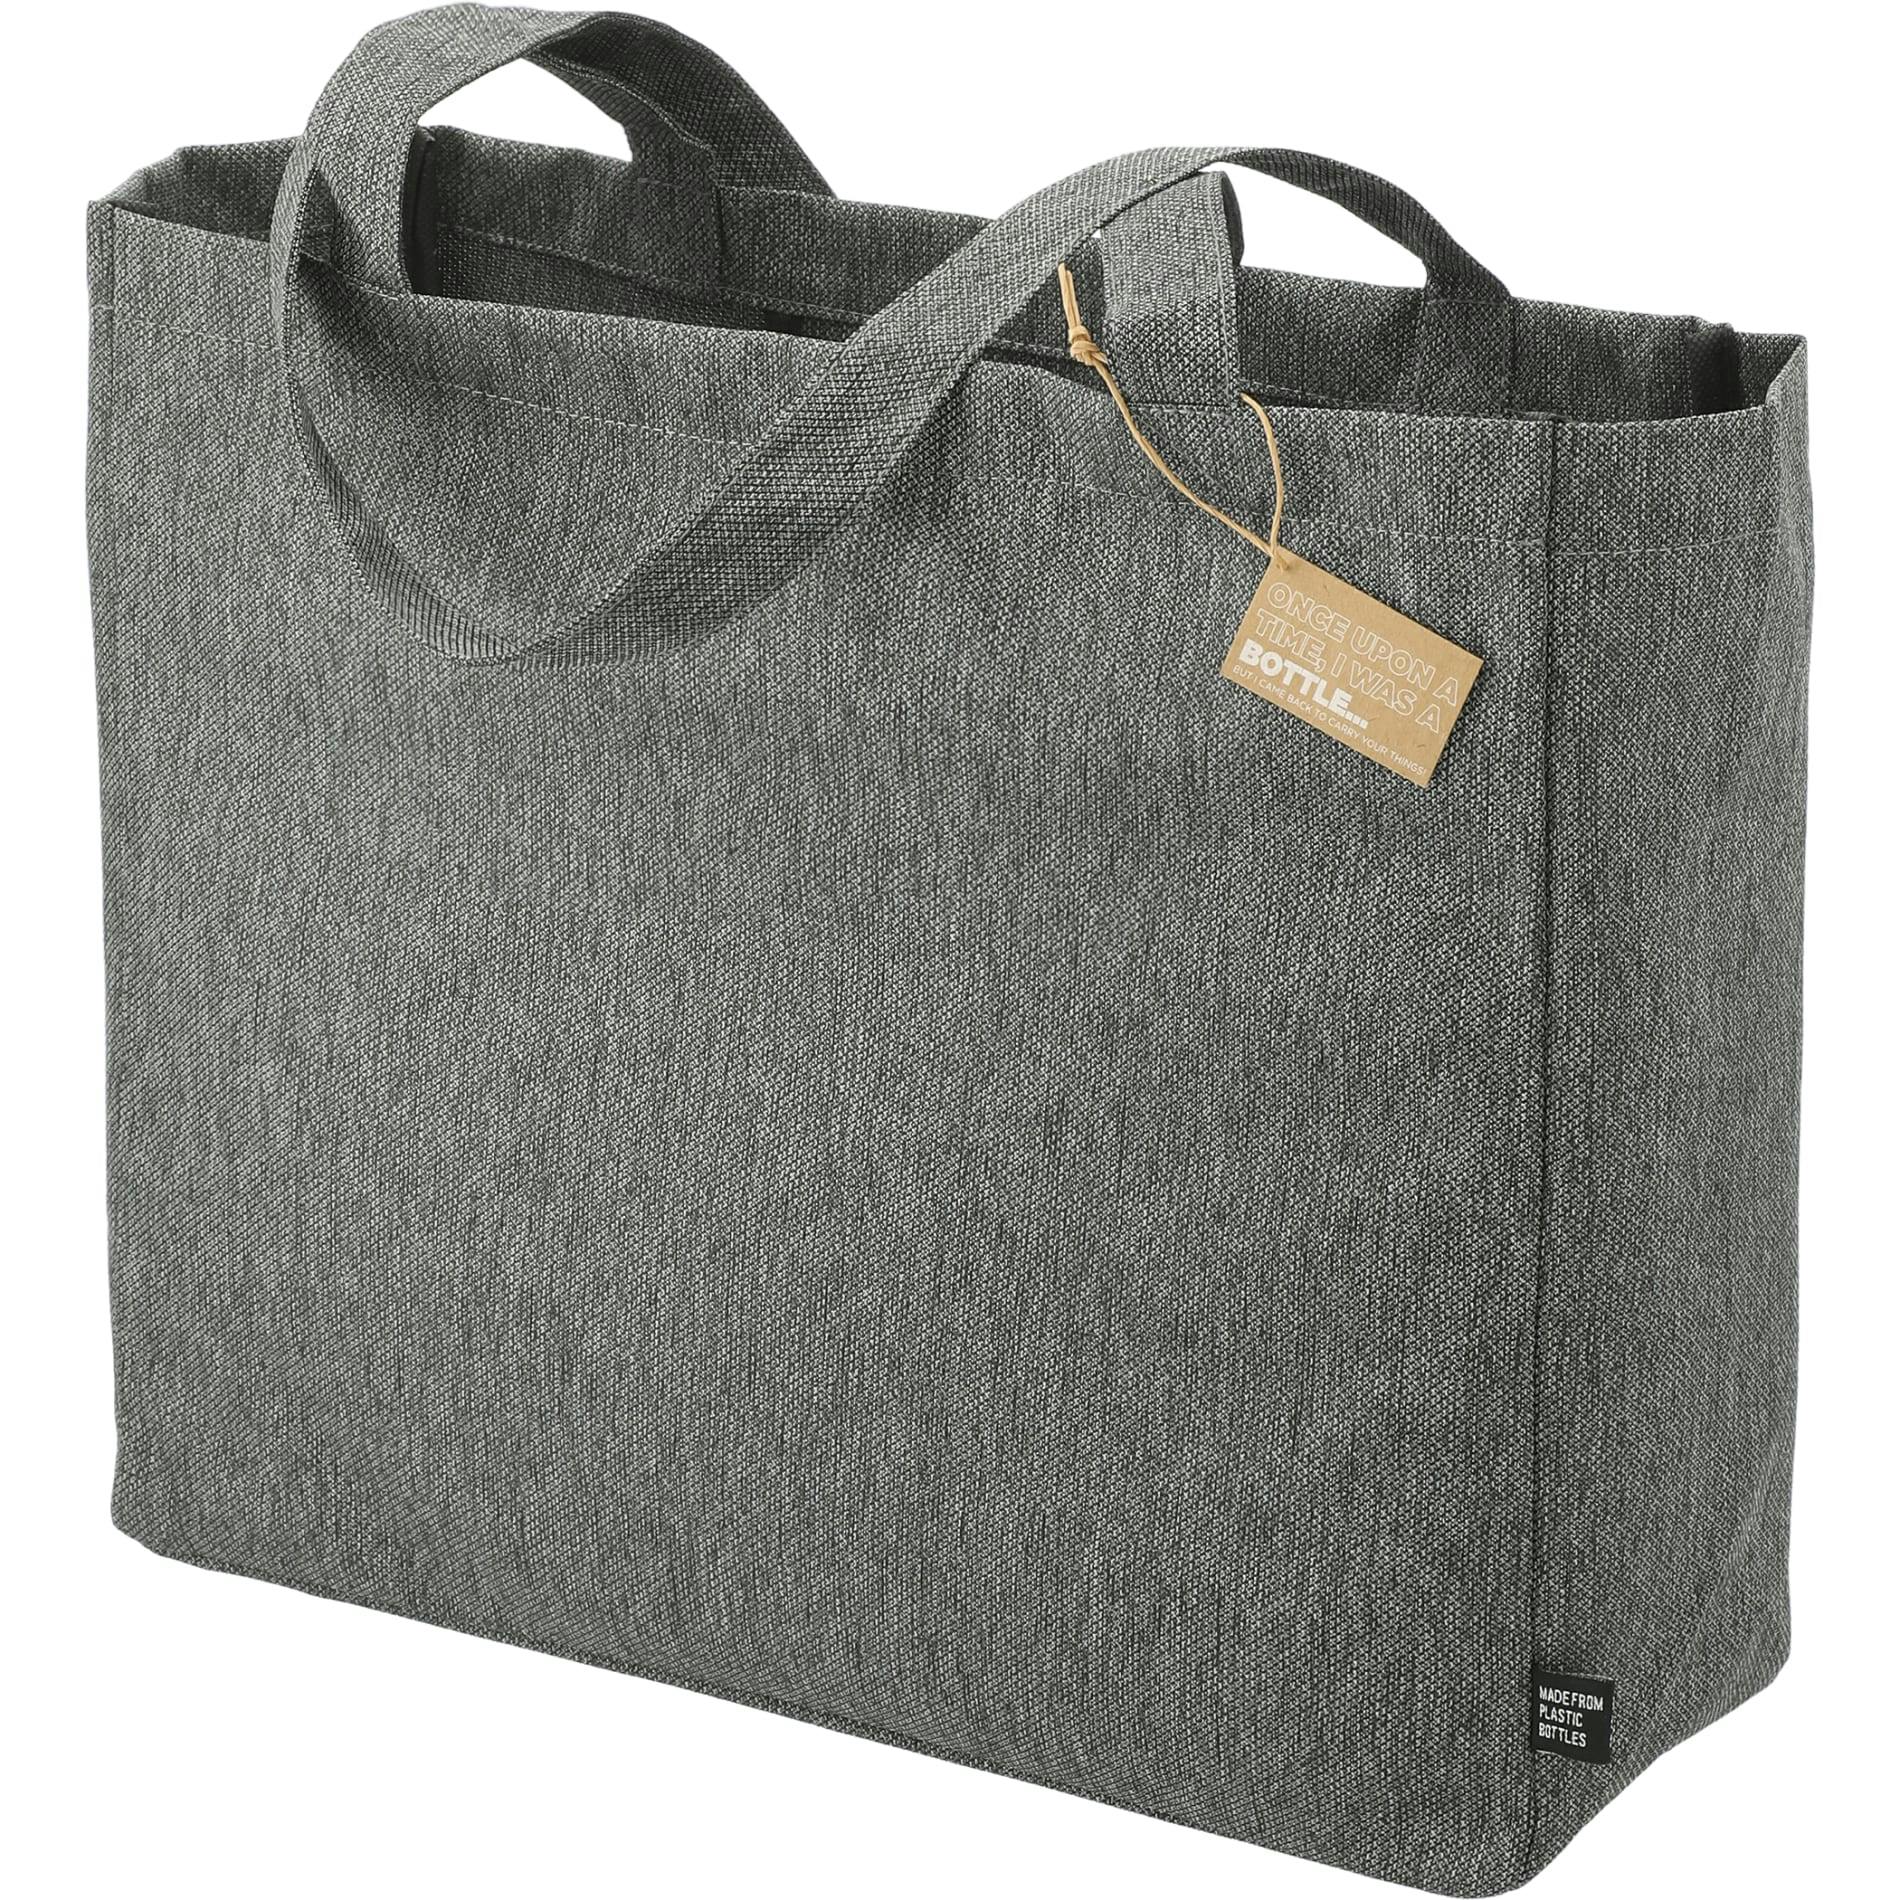 Vila Recycled All-Purpose Tote - additional Image 5